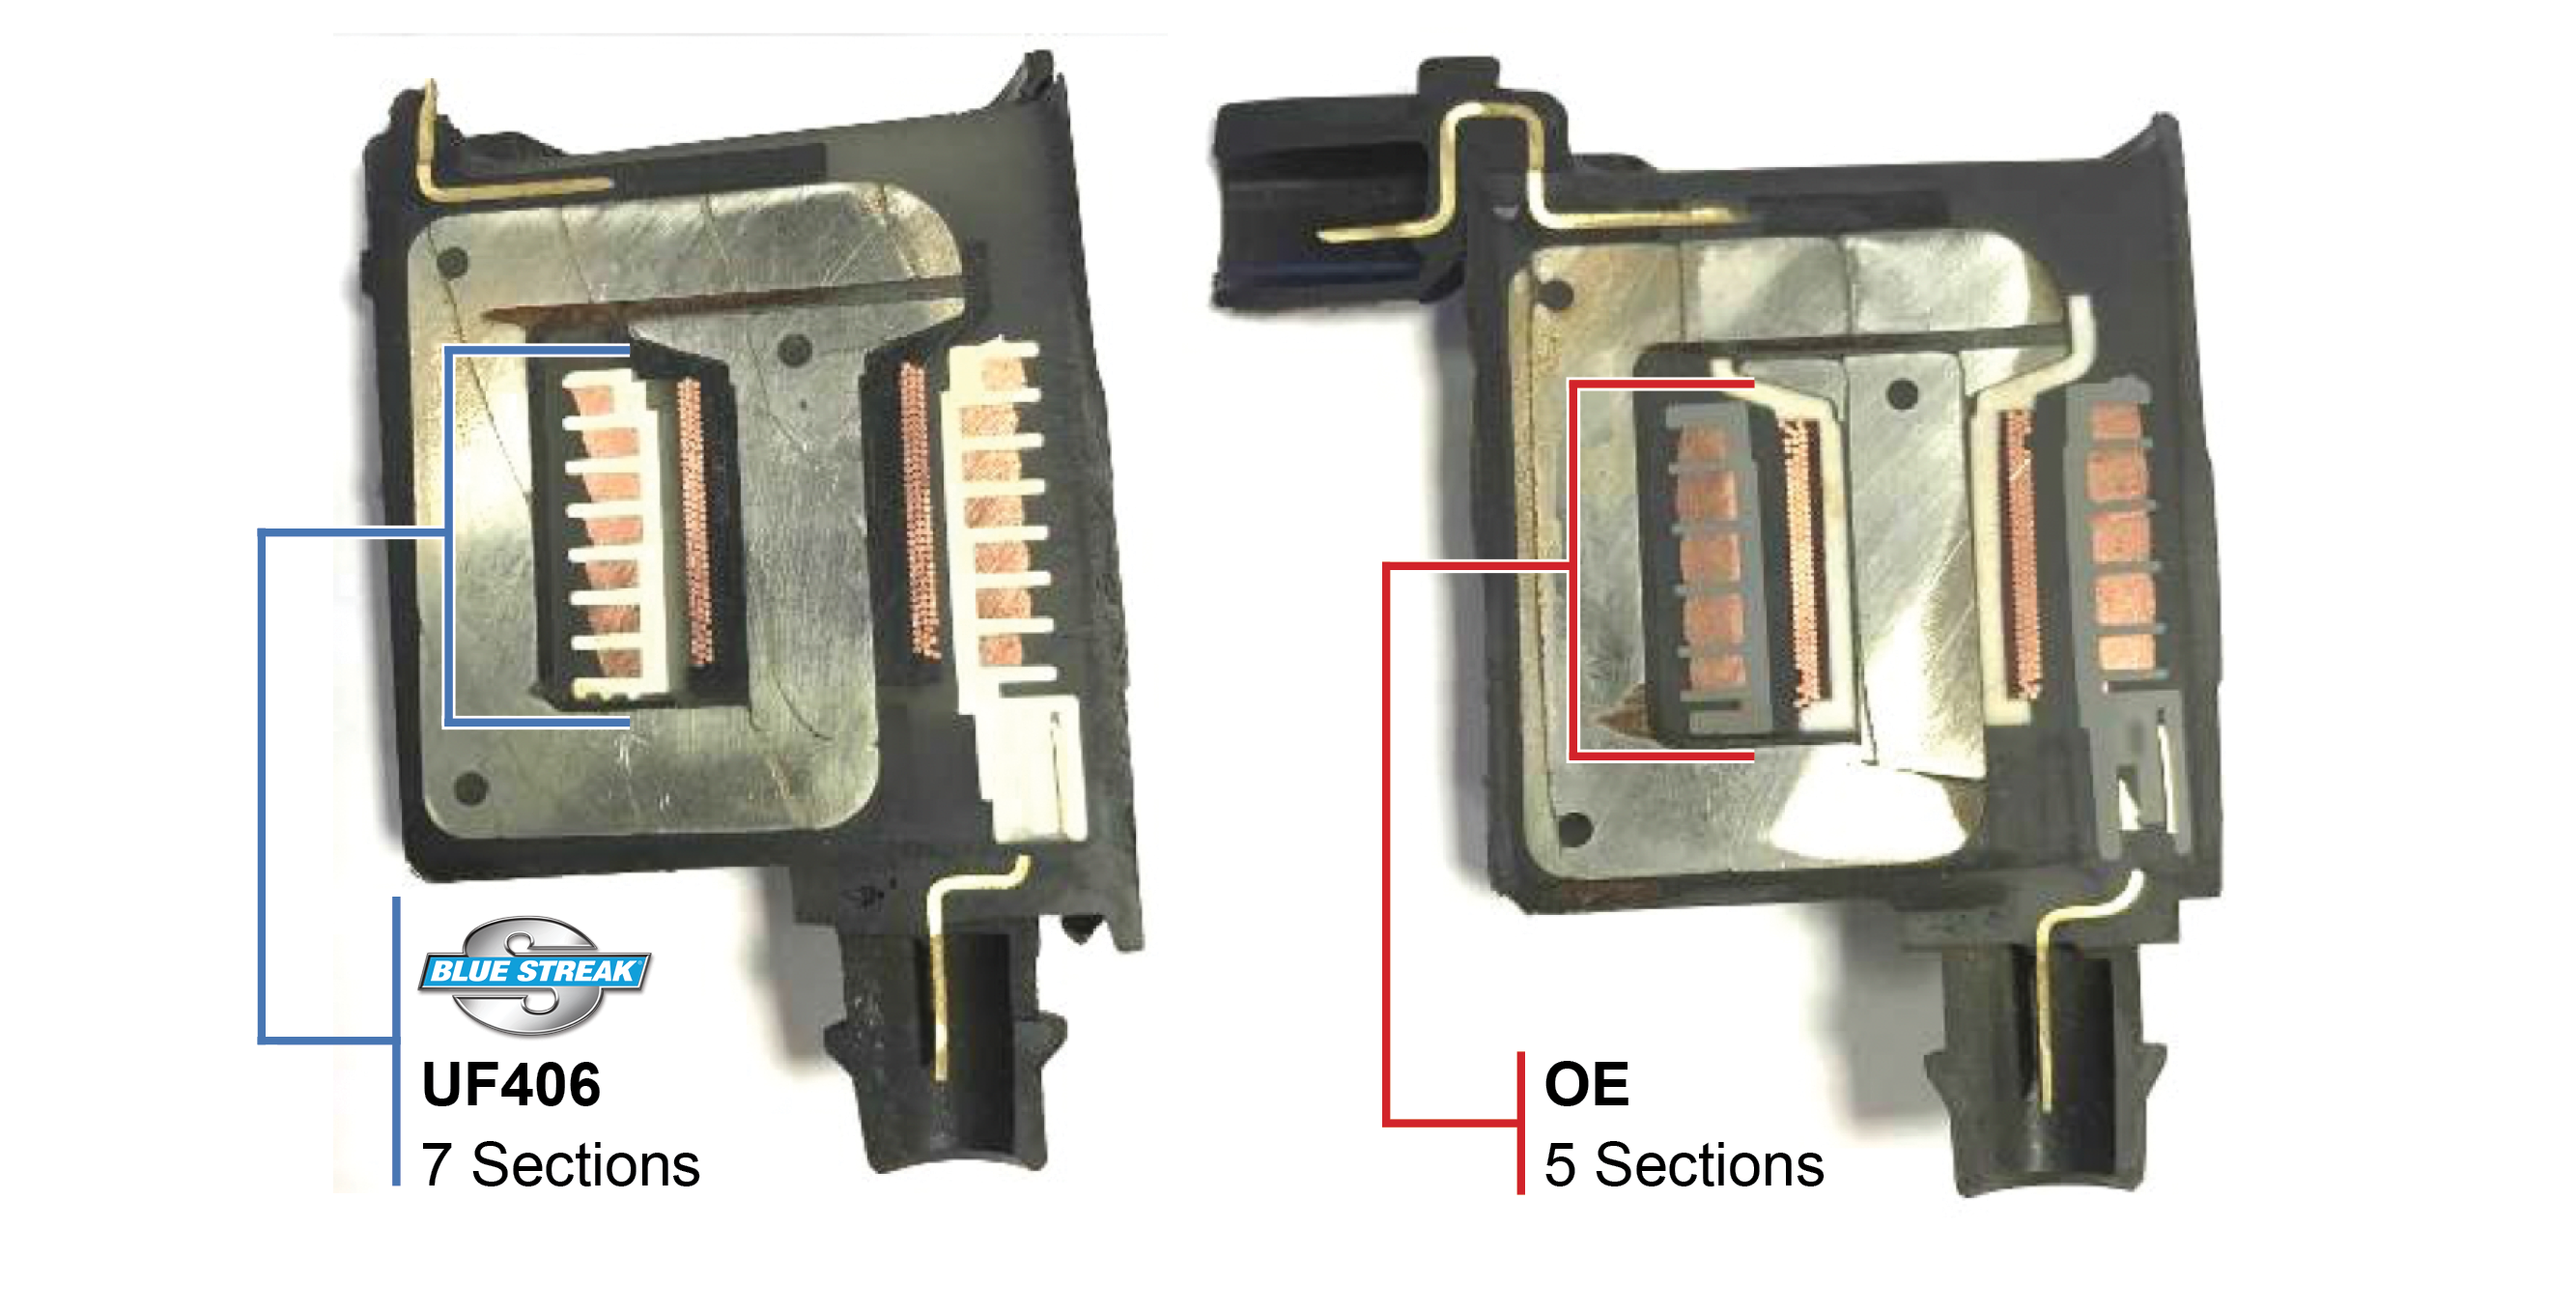 Blue Streak Ignition Coil (UF406) compared to OE